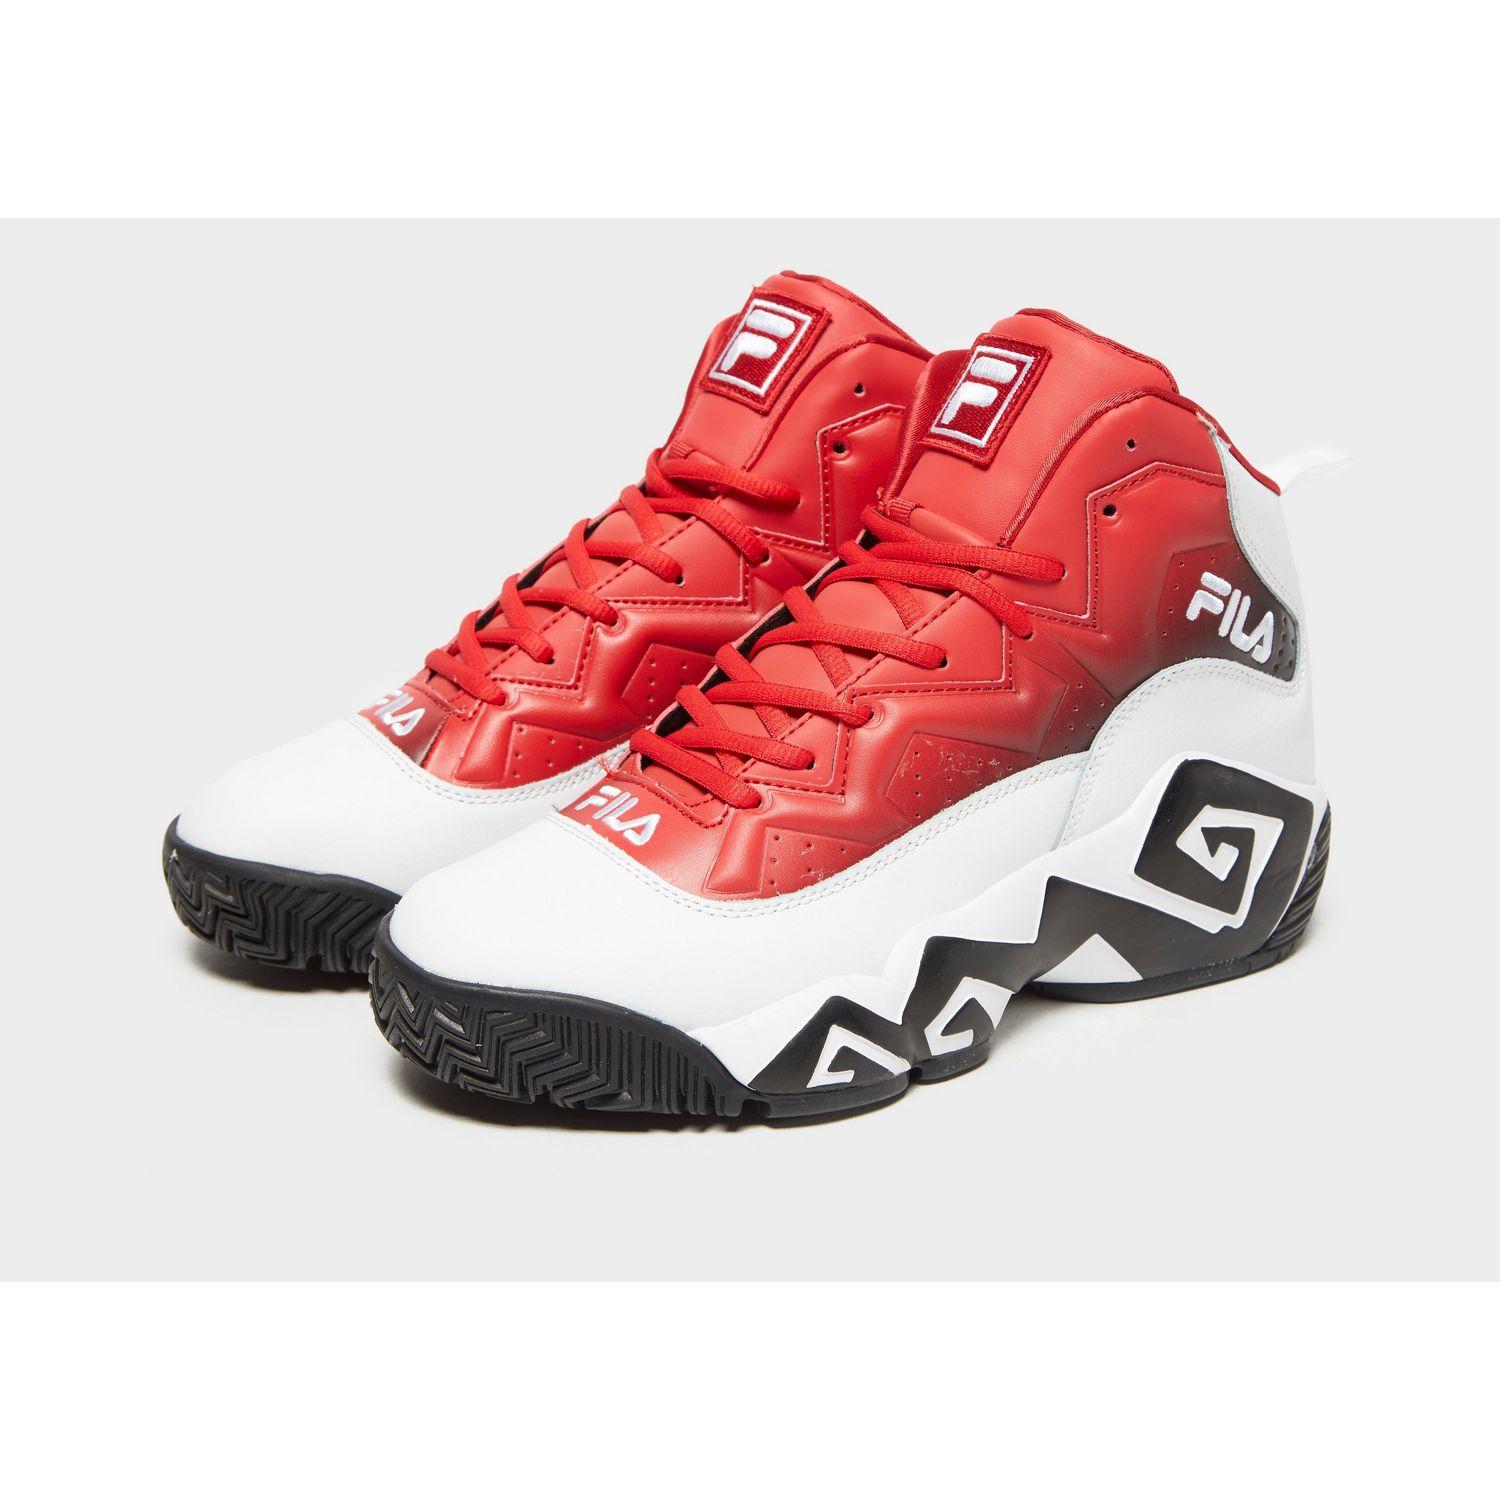 Fila Mb Red Poland, SAVE 56% - aveclumiere.com